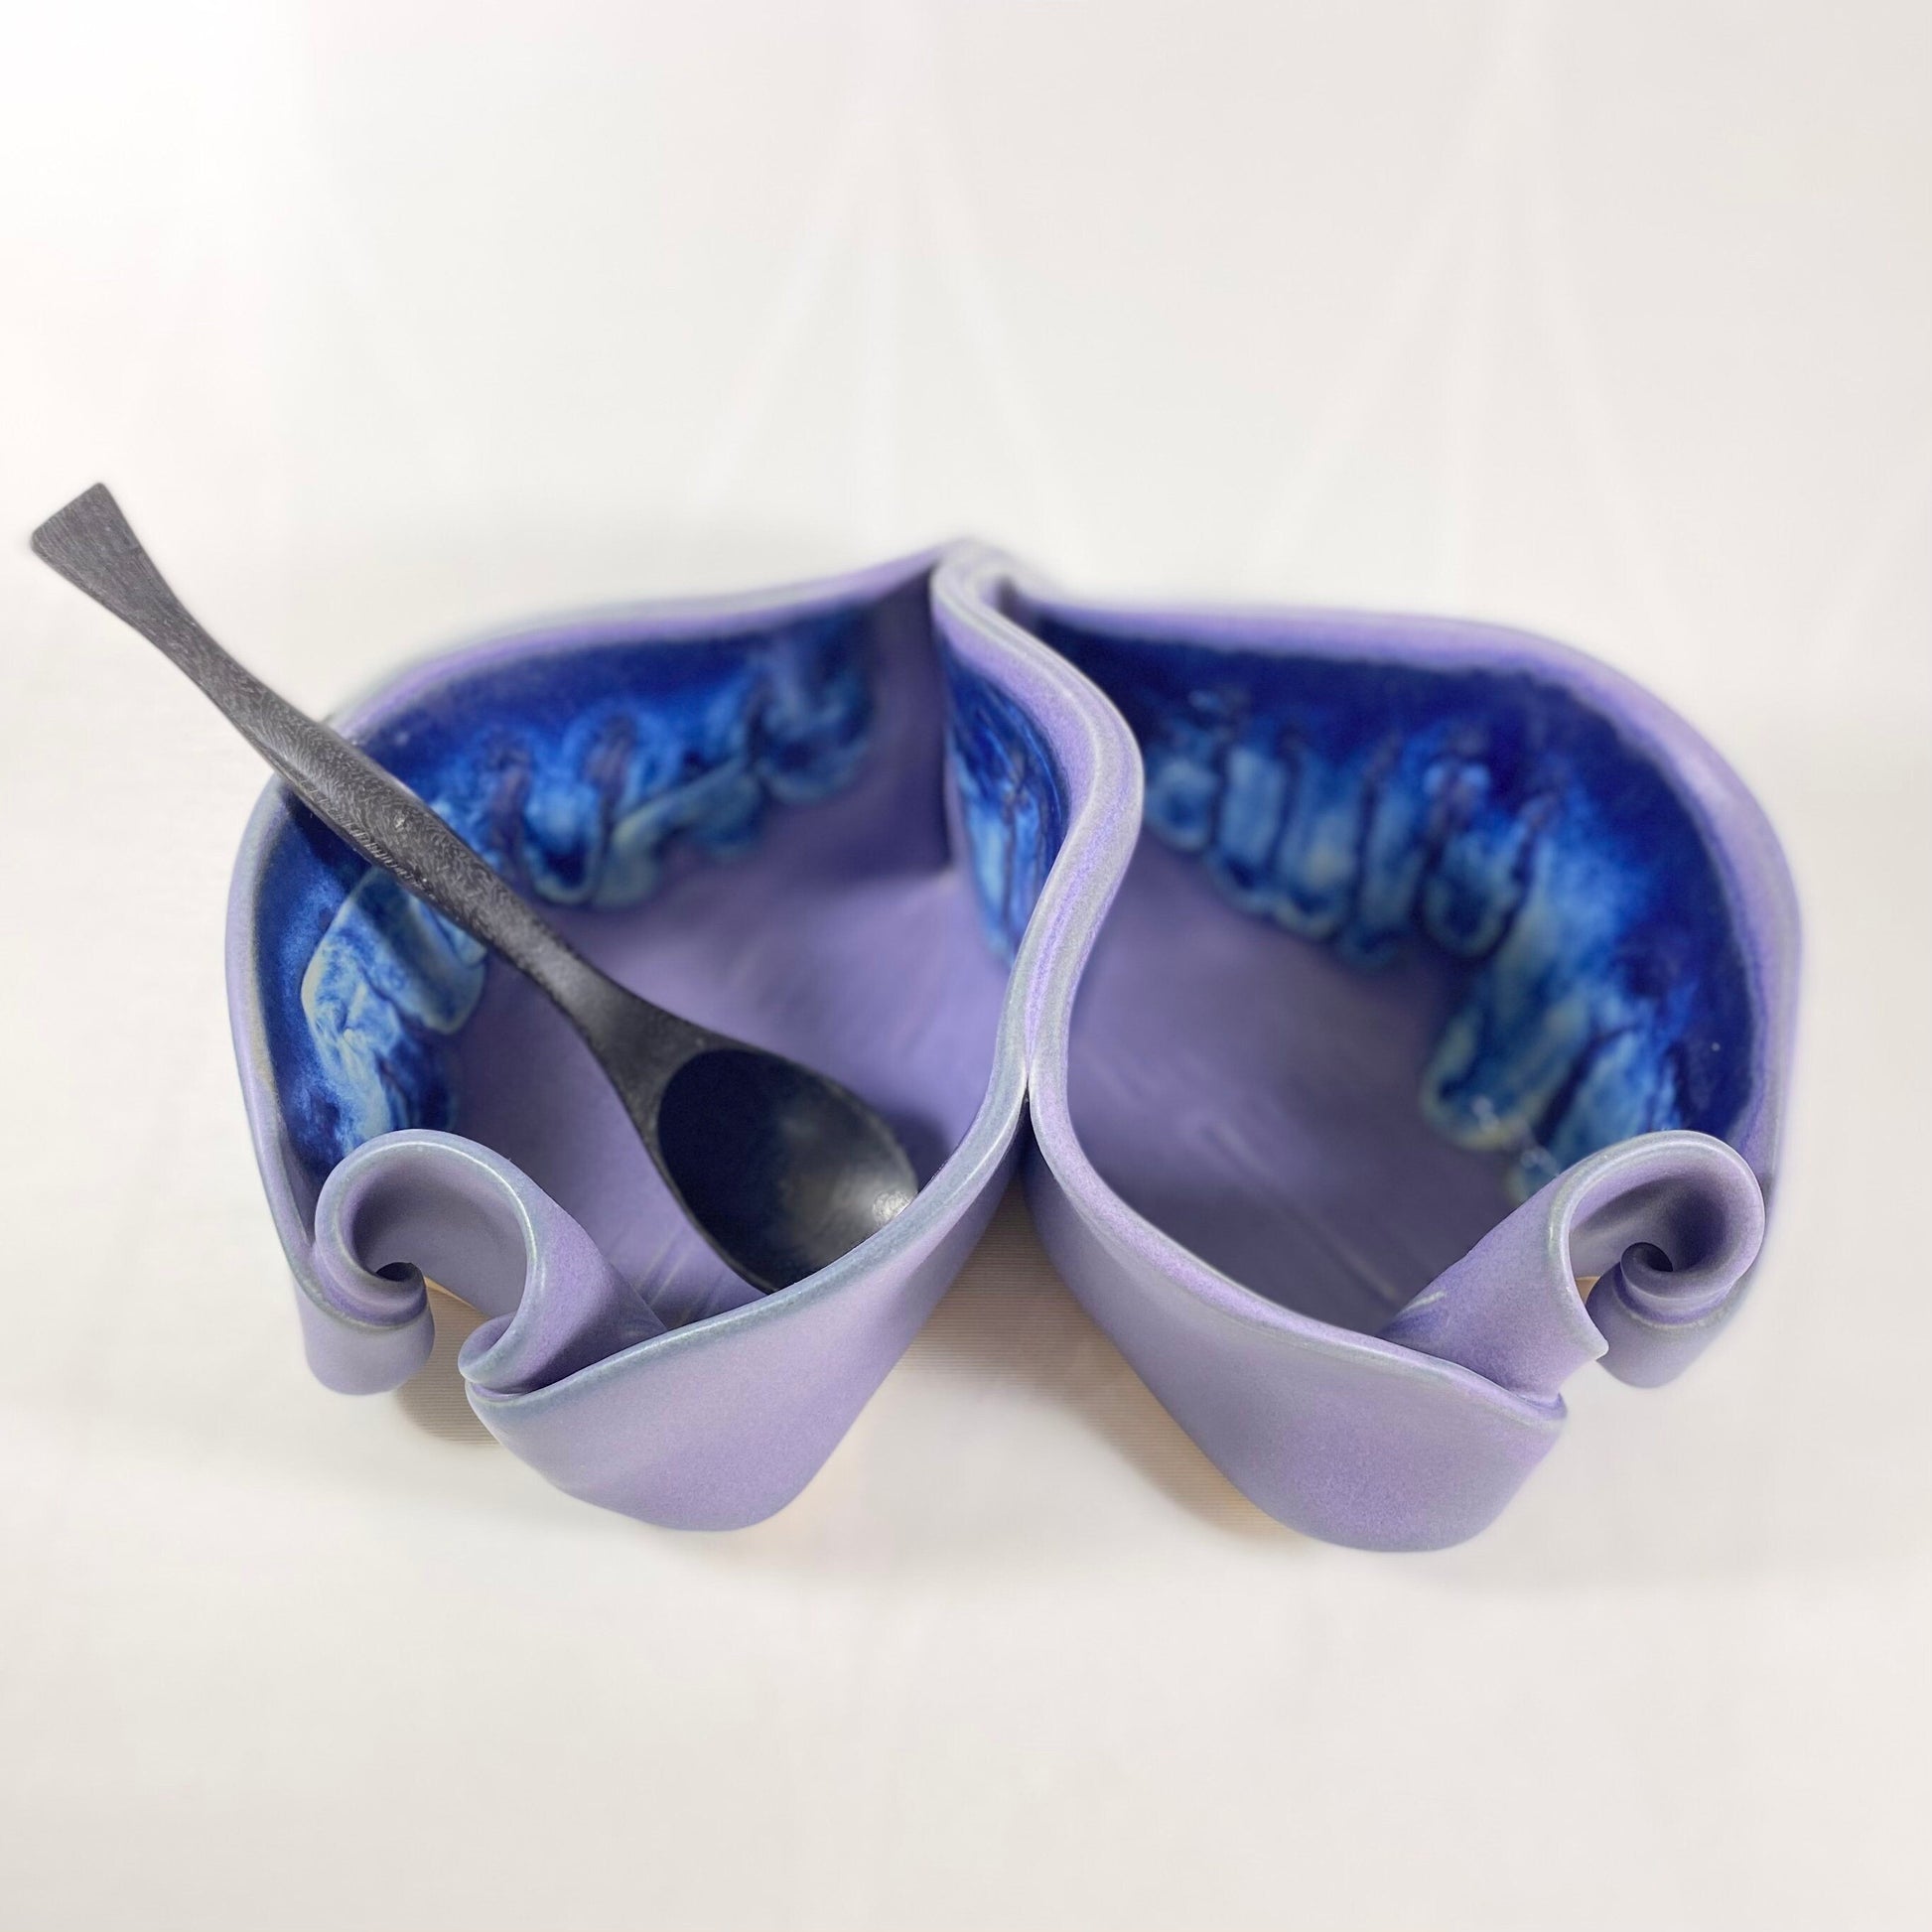 Handmade Purple and Blue Double Sided Pistachio Bowl with Serving Spoon, Functional and Decorative Pottery